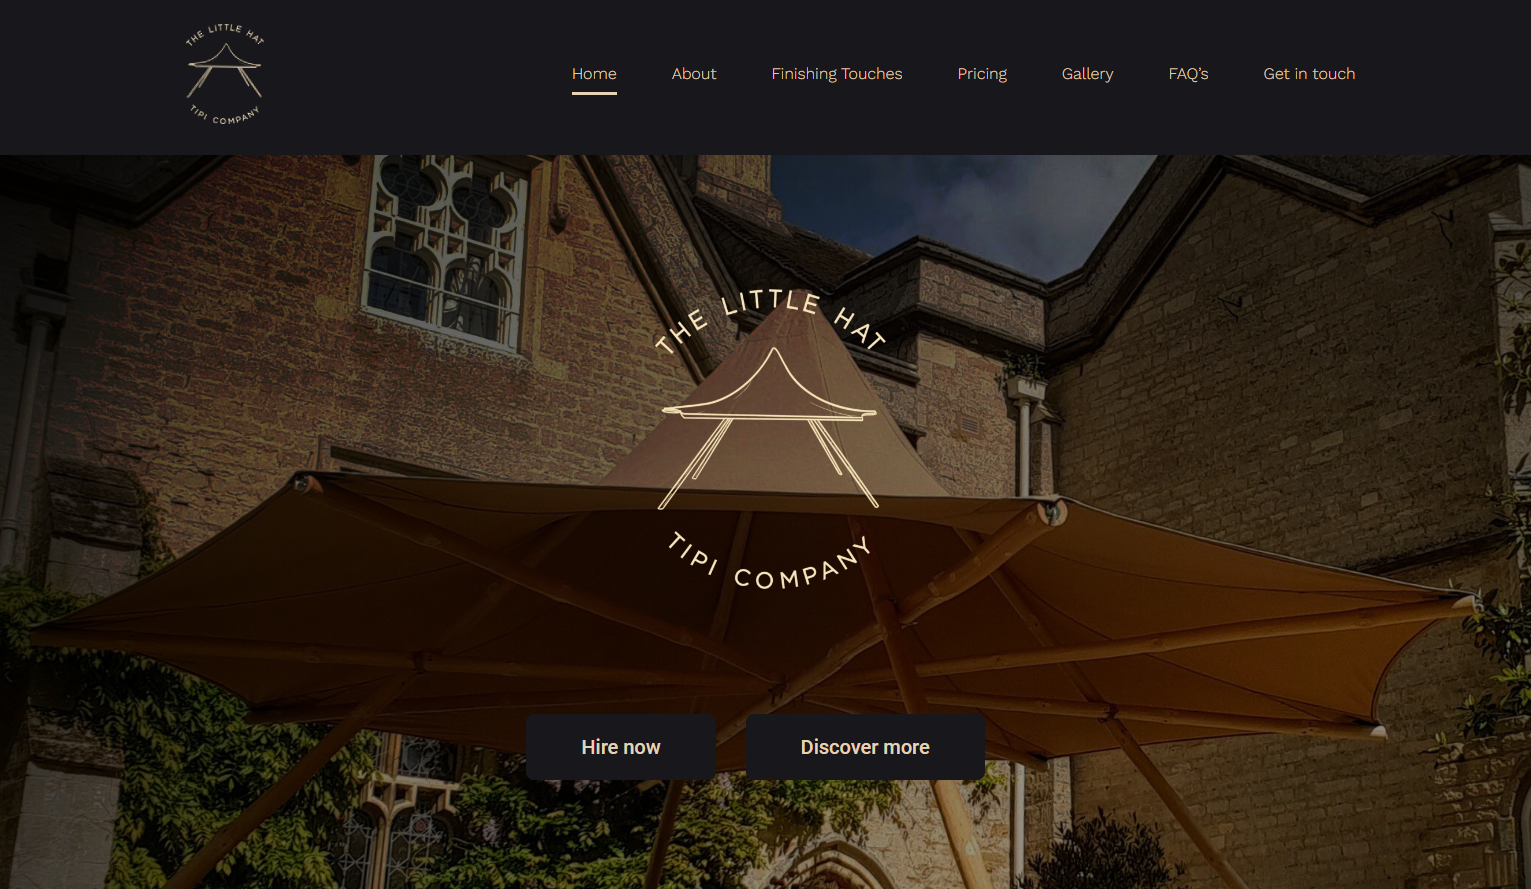 The Little Hat Tipi Company website designed by Michael Frost Digital